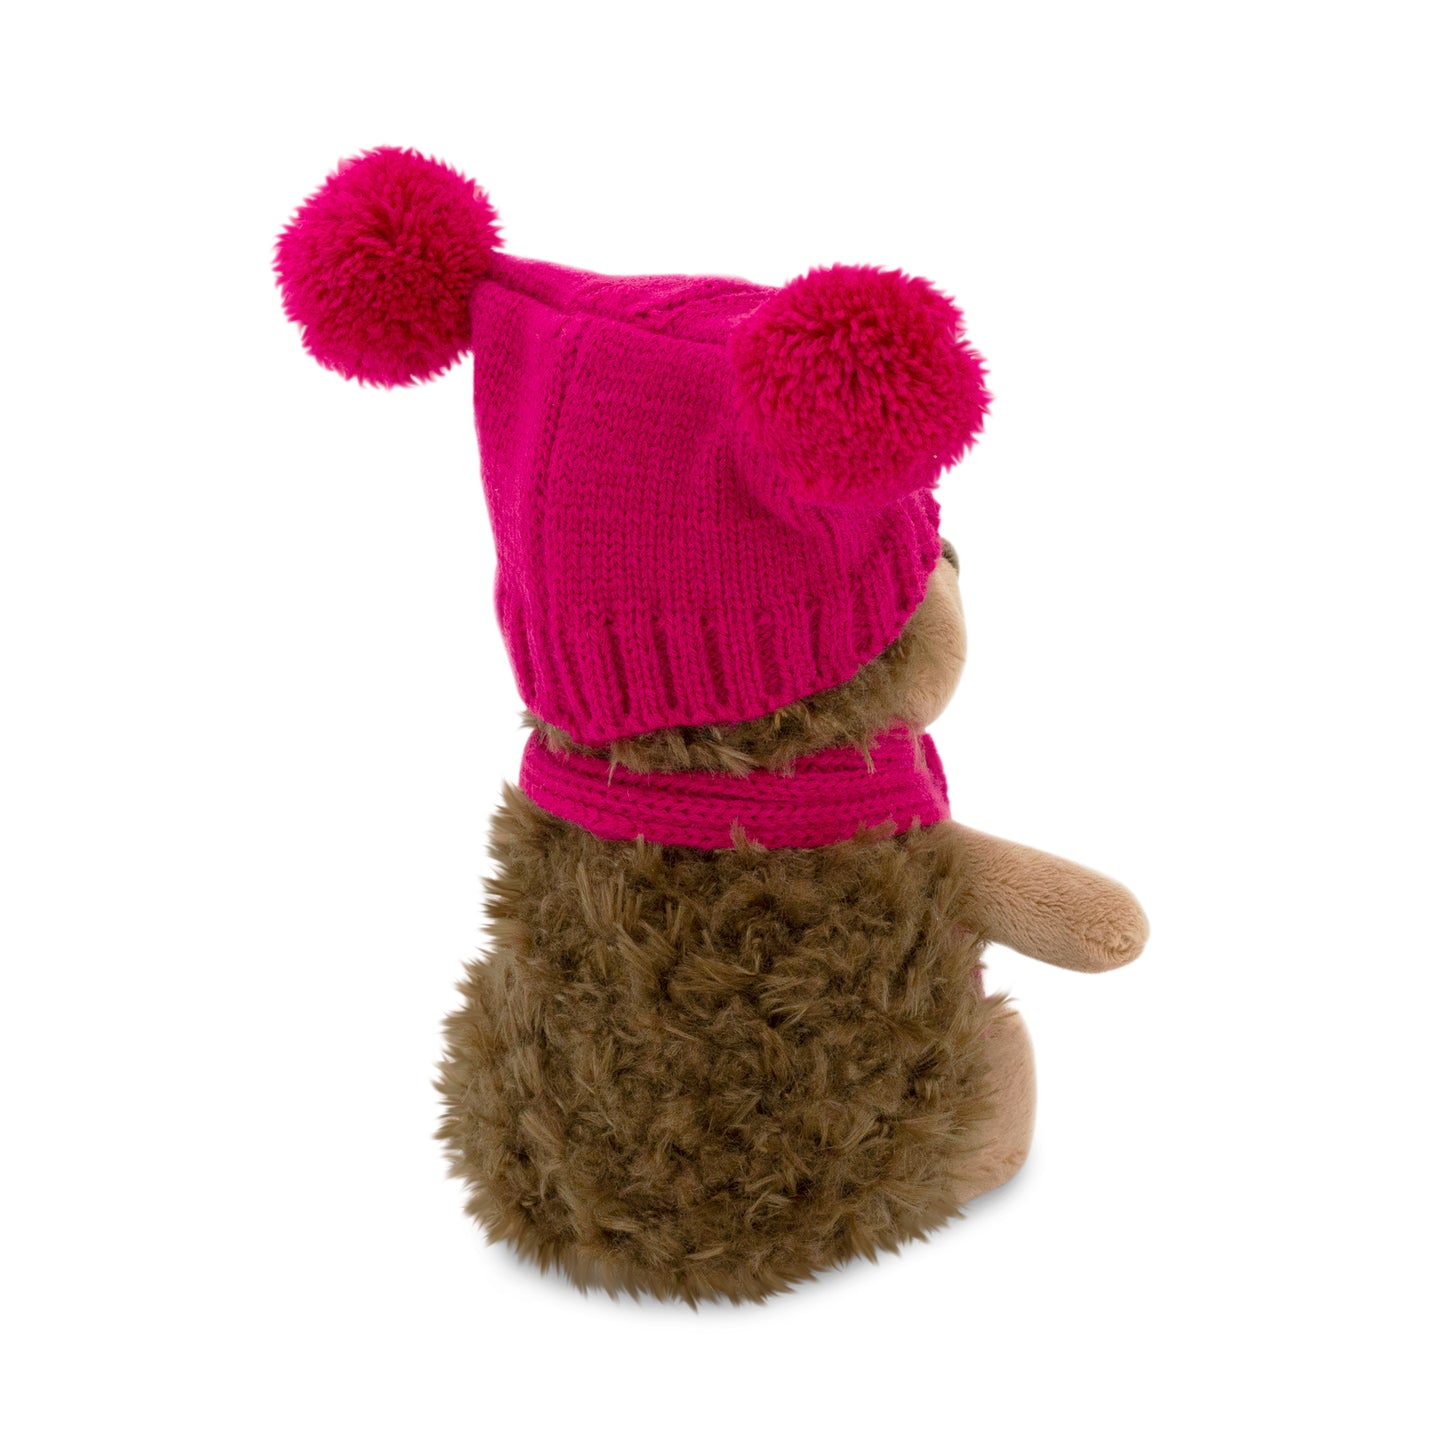 Fluffy the Hedgehog in double-pompon hat